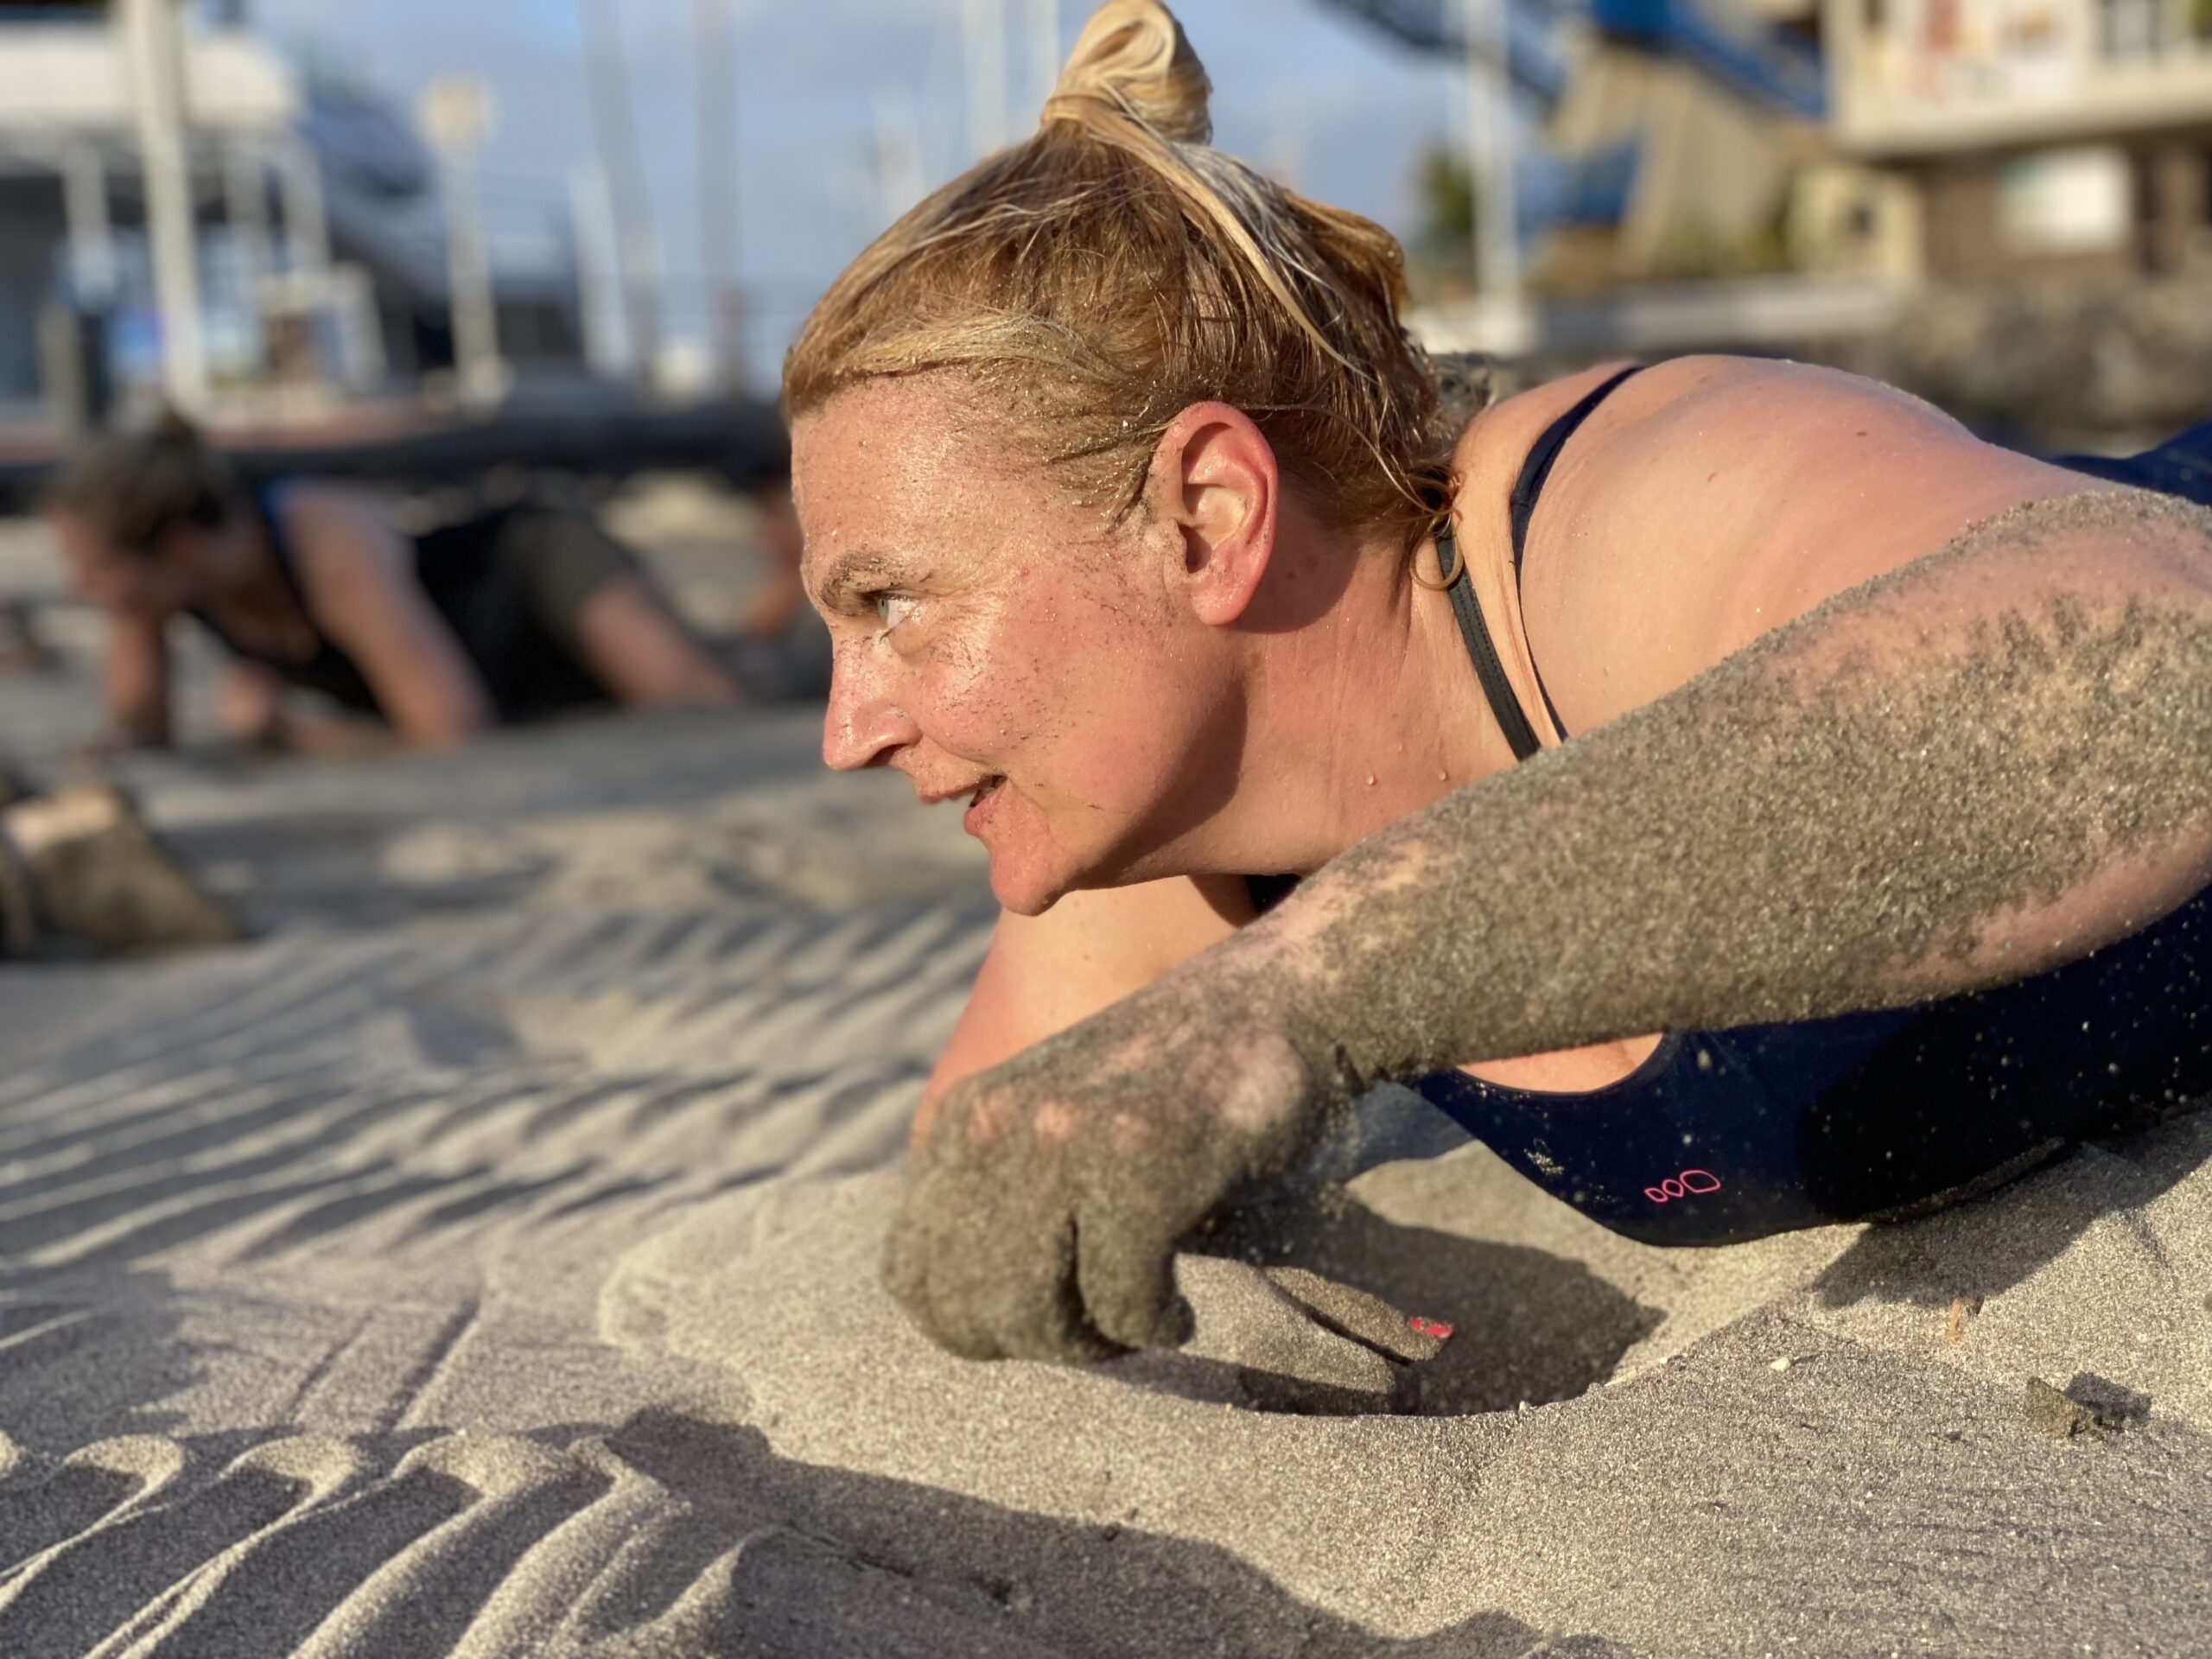 tenerife-fitness-bootcamp-weight-loss-1-scaled